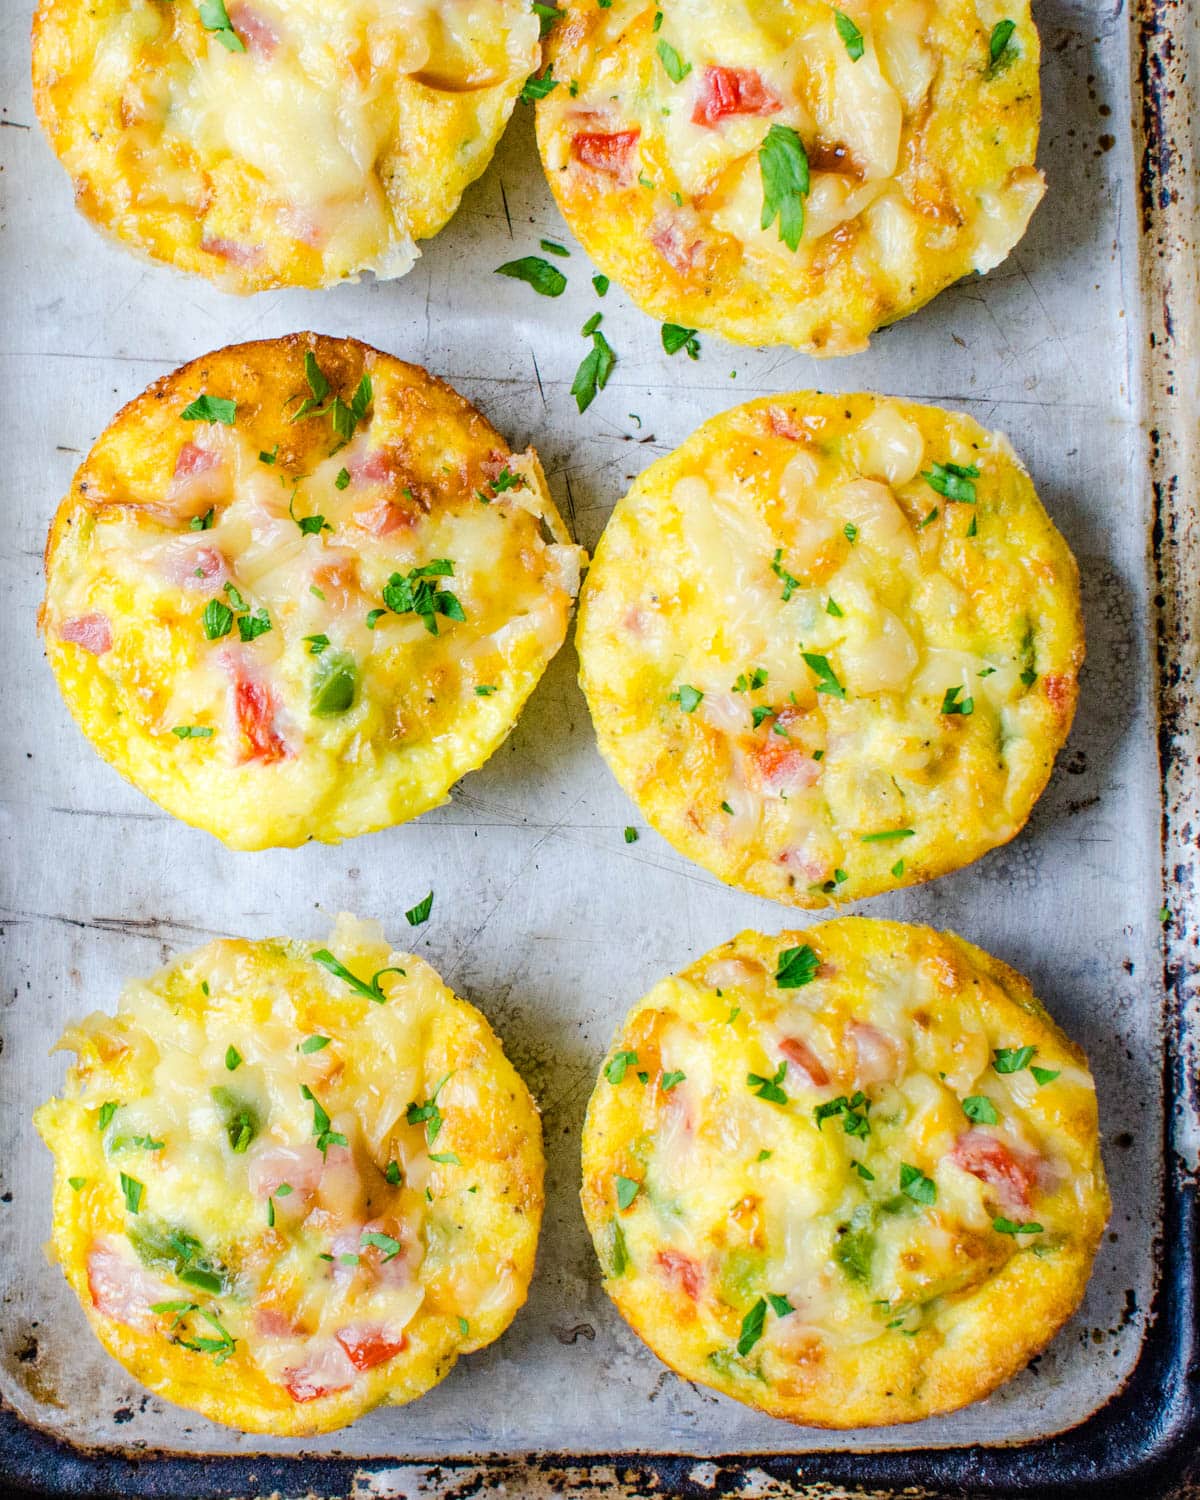 Egg omelette cups on a sheet pan.